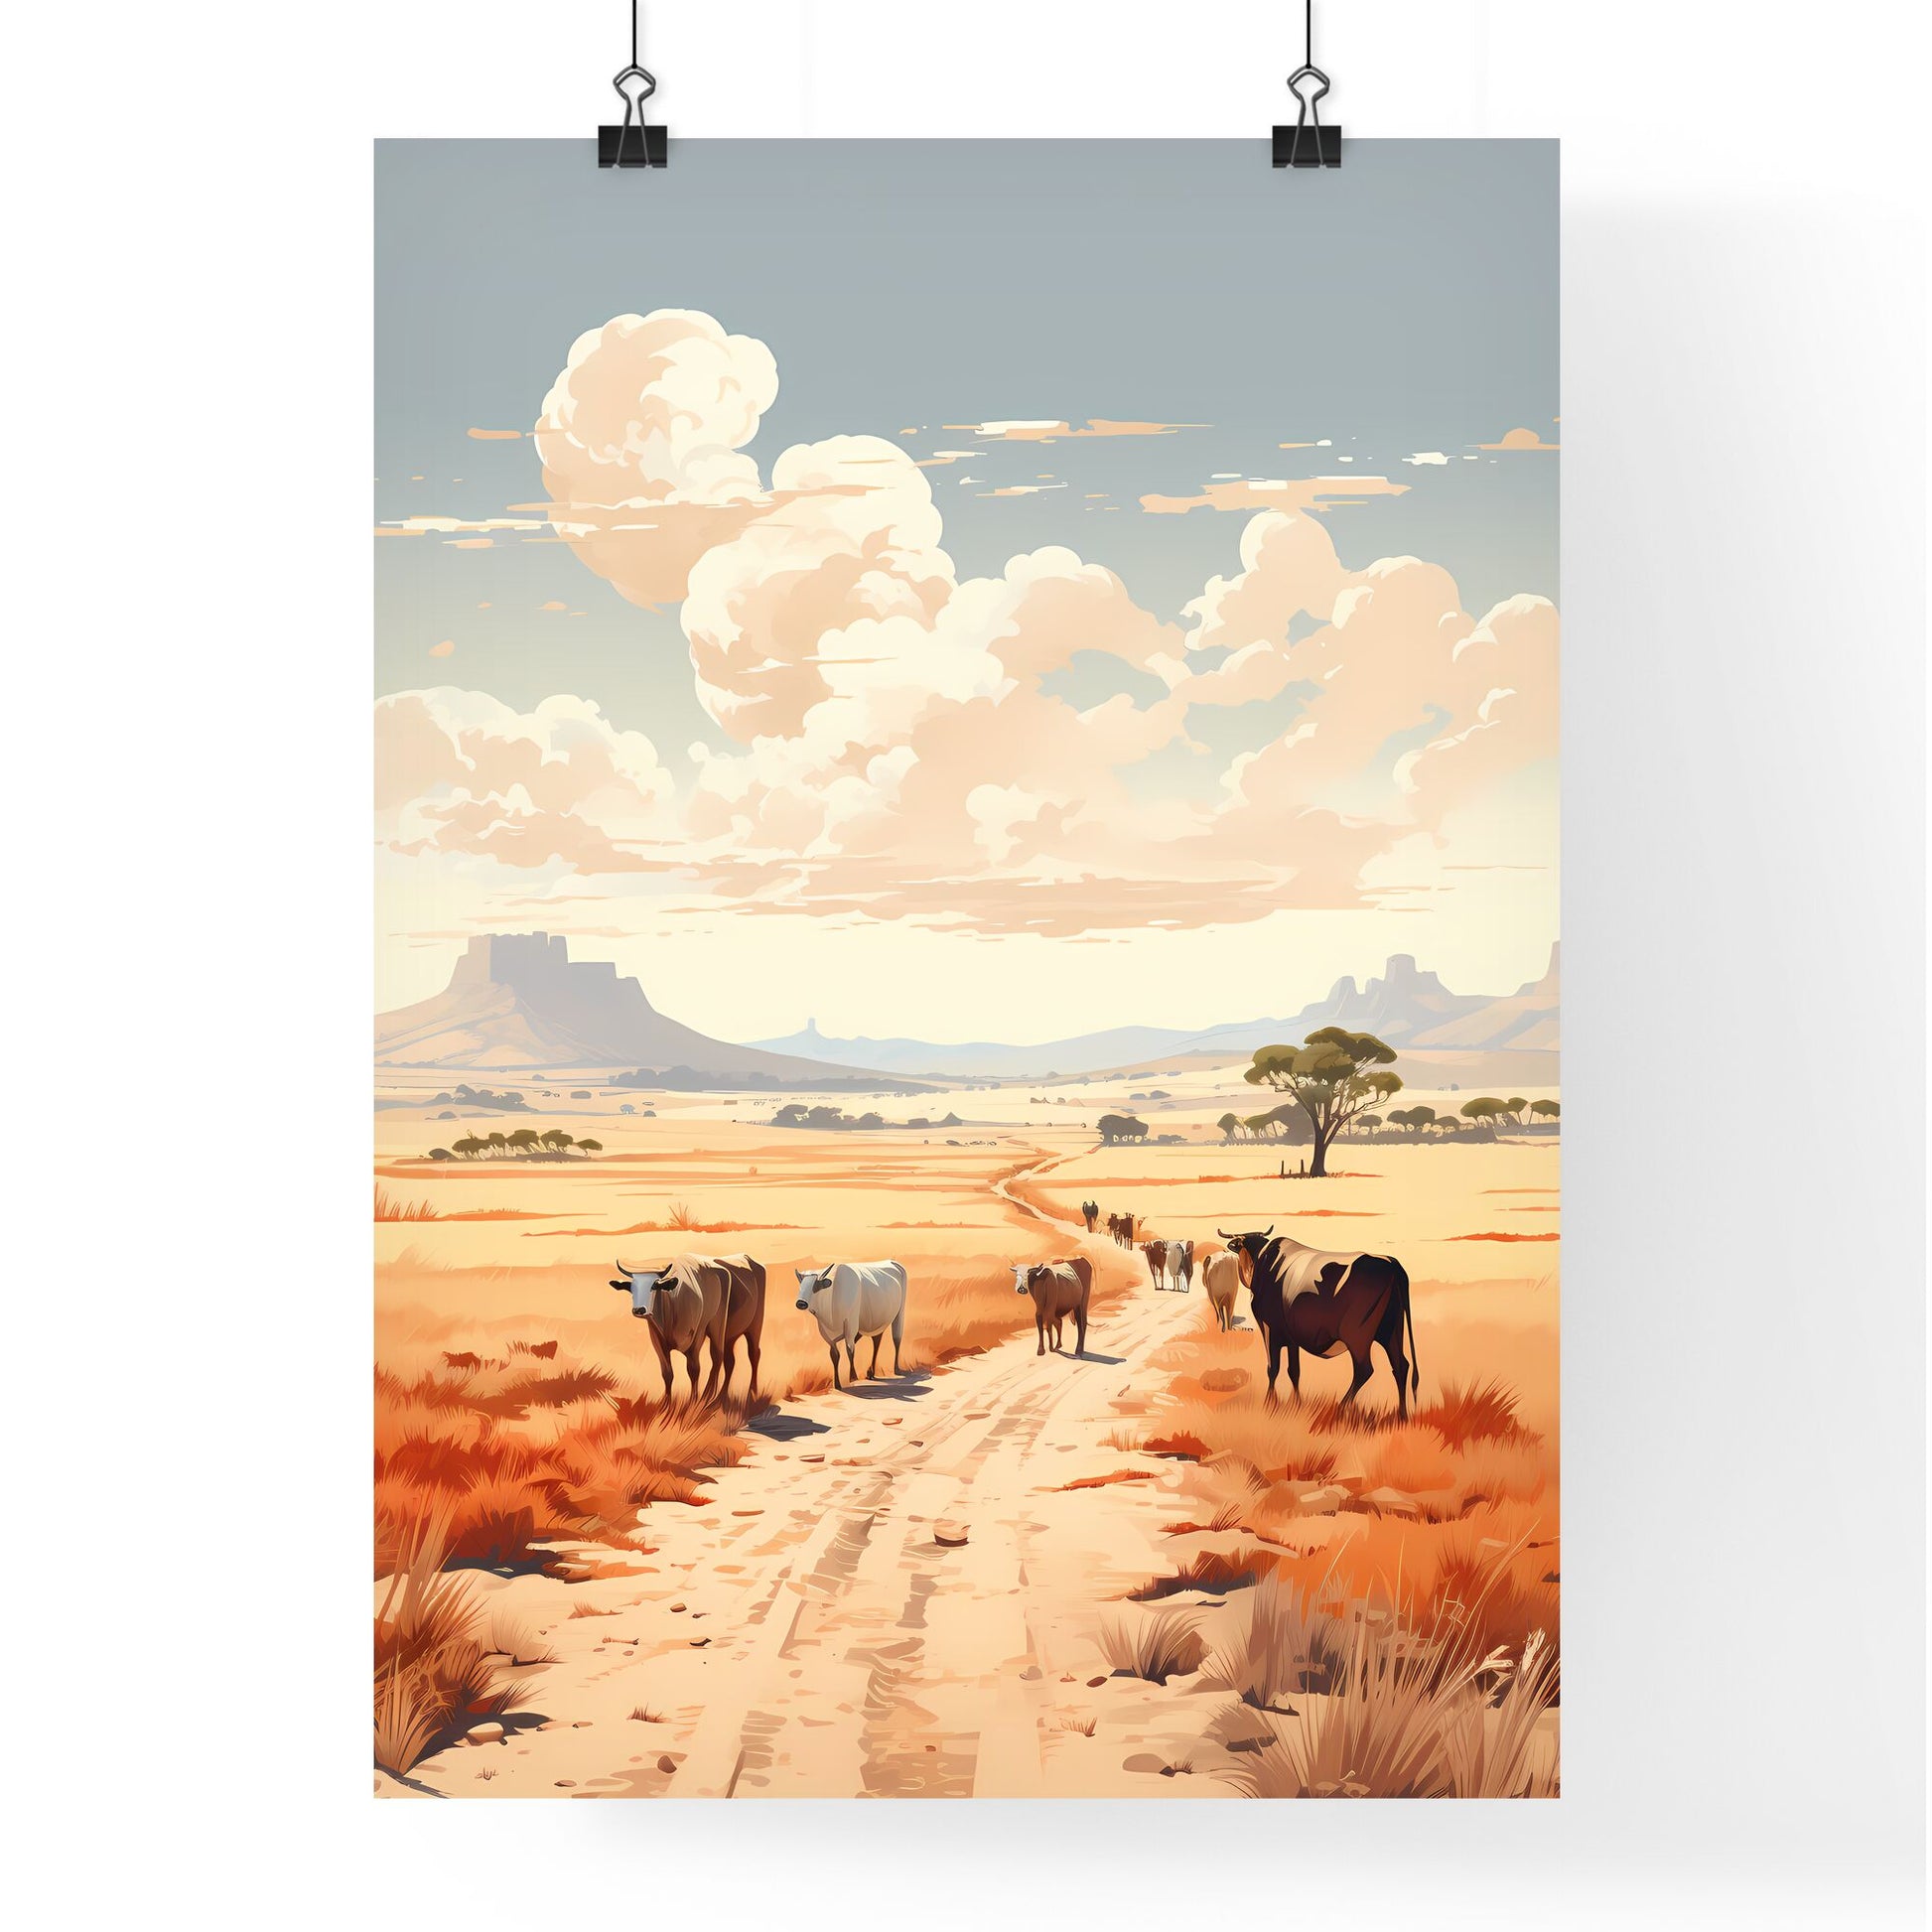 Texas - A Group Of Cows Walking On A Dirt Road Default Title